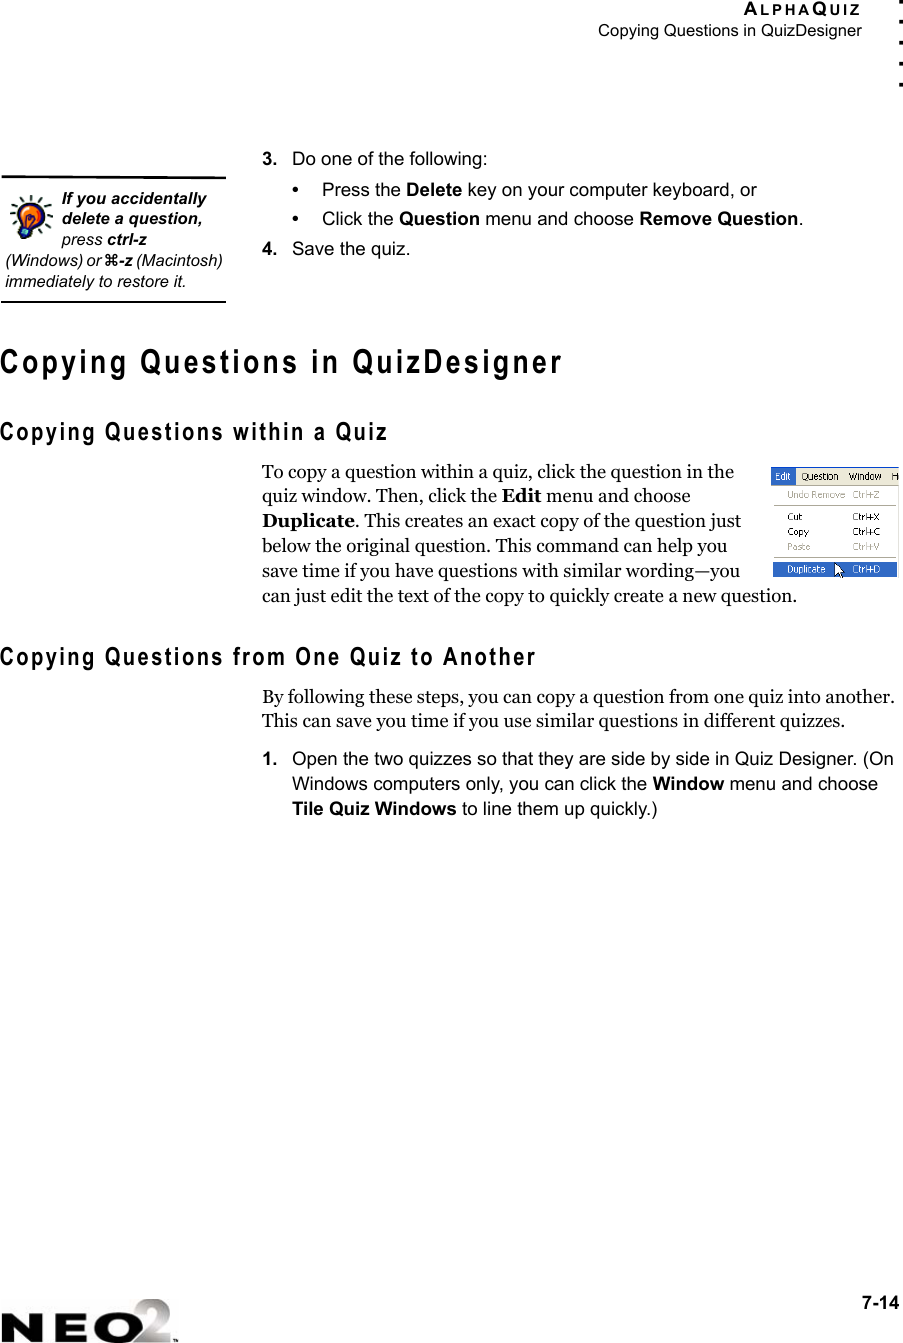 ALPHAQUIZCopying Questions in QuizDesigner7-14. . . . .3. Do one of the following:•Press the Delete key on your computer keyboard, or•Click the Question menu and choose Remove Question.4. Save the quiz.Copying Questions in QuizDesignerCopying Questions within a QuizTo copy a question within a quiz, click the question in the quiz window. Then, click the Edit menu and choose Duplicate. This creates an exact copy of the question just below the original question. This command can help you save time if you have questions with similar wording—you can just edit the text of the copy to quickly create a new question.Copying Questions from One Quiz to AnotherBy following these steps, you can copy a question from one quiz into another. This can save you time if you use similar questions in different quizzes.1. Open the two quizzes so that they are side by side in Quiz Designer. (On Windows computers only, you can click the Window menu and choose Tile Quiz Windows to line them up quickly.)If you accidentally delete a question, press ctrl-z (Windows) or z-z (Macintosh) immediately to restore it.